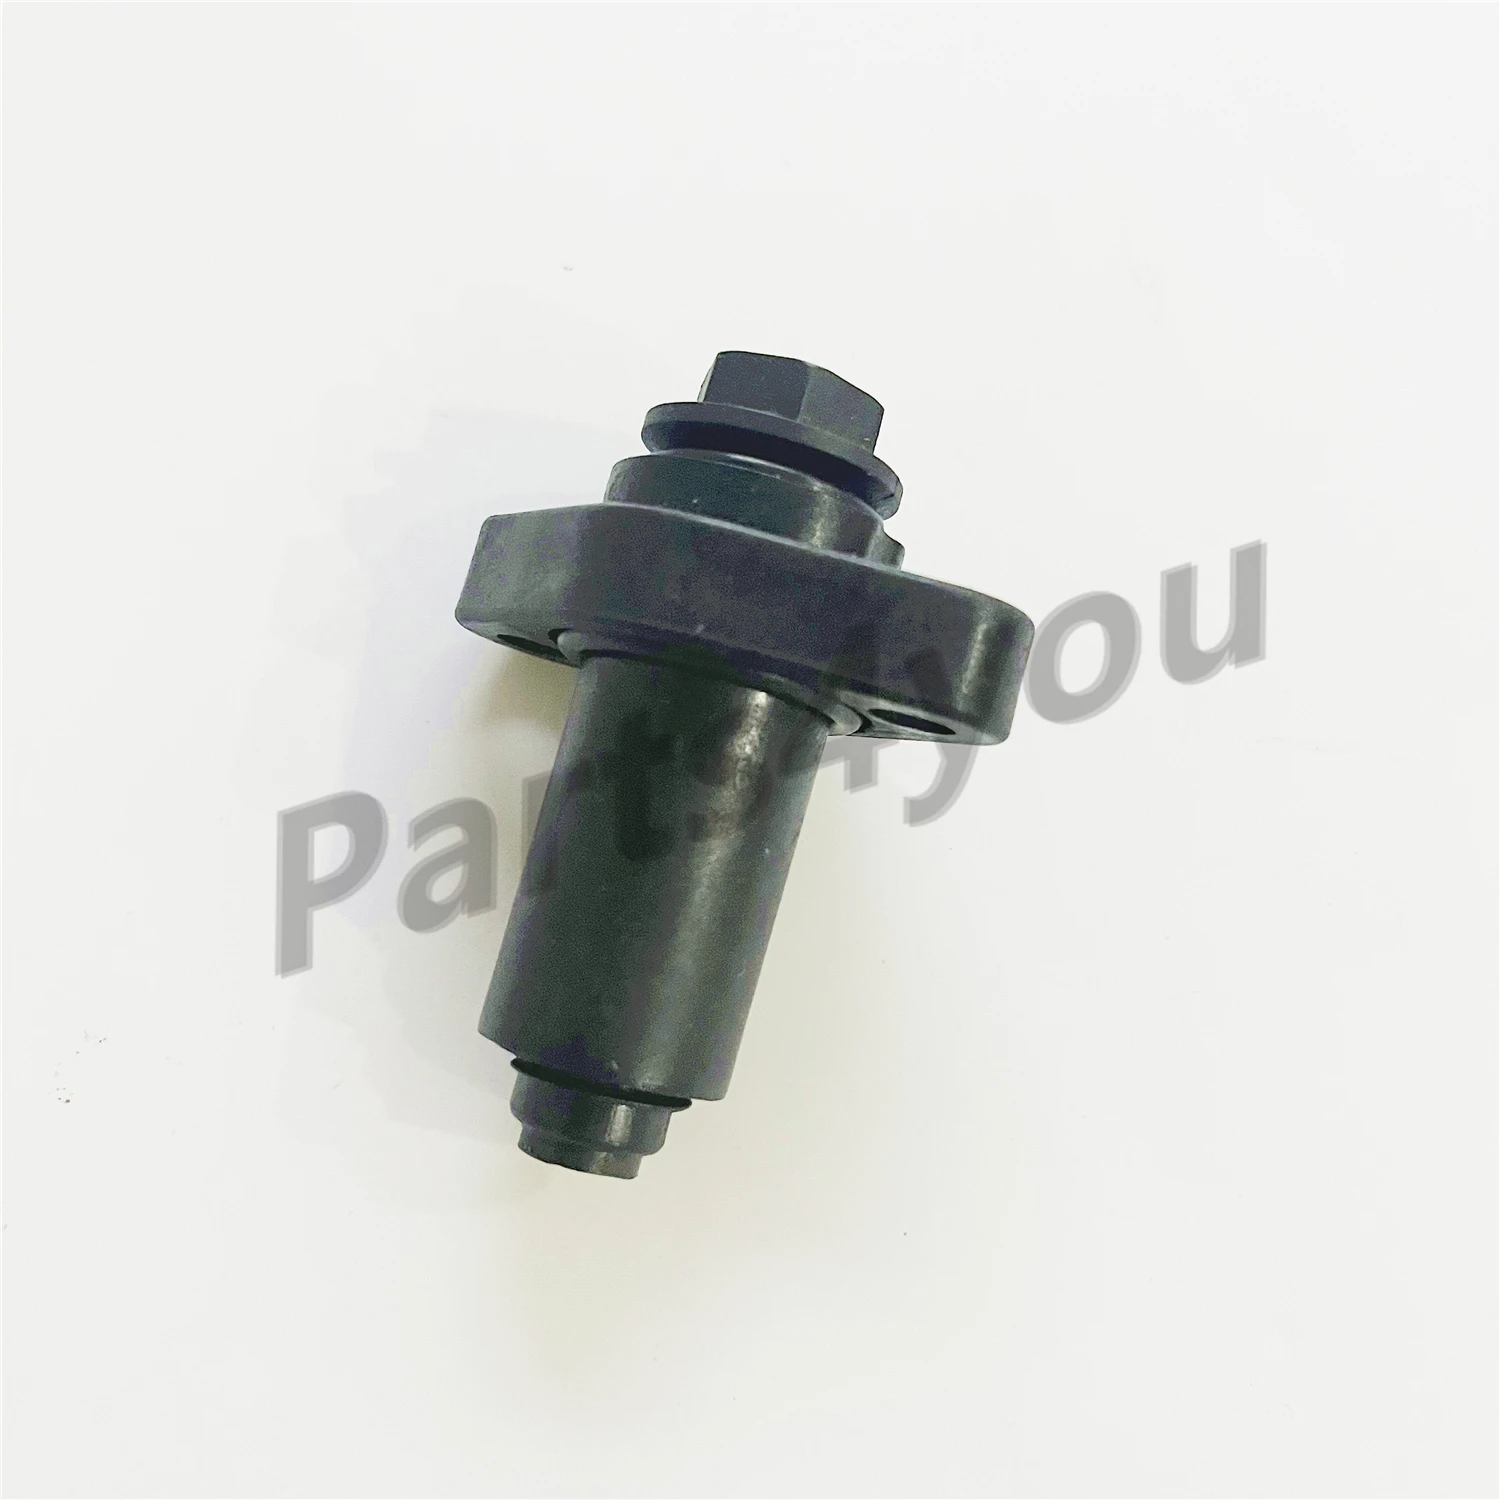 Timing Chain Tensioner Assy for Stels Wolverine 800 Guepard 650 800 850 ATV 102108-001-0000 14530-E05-000 LU049822